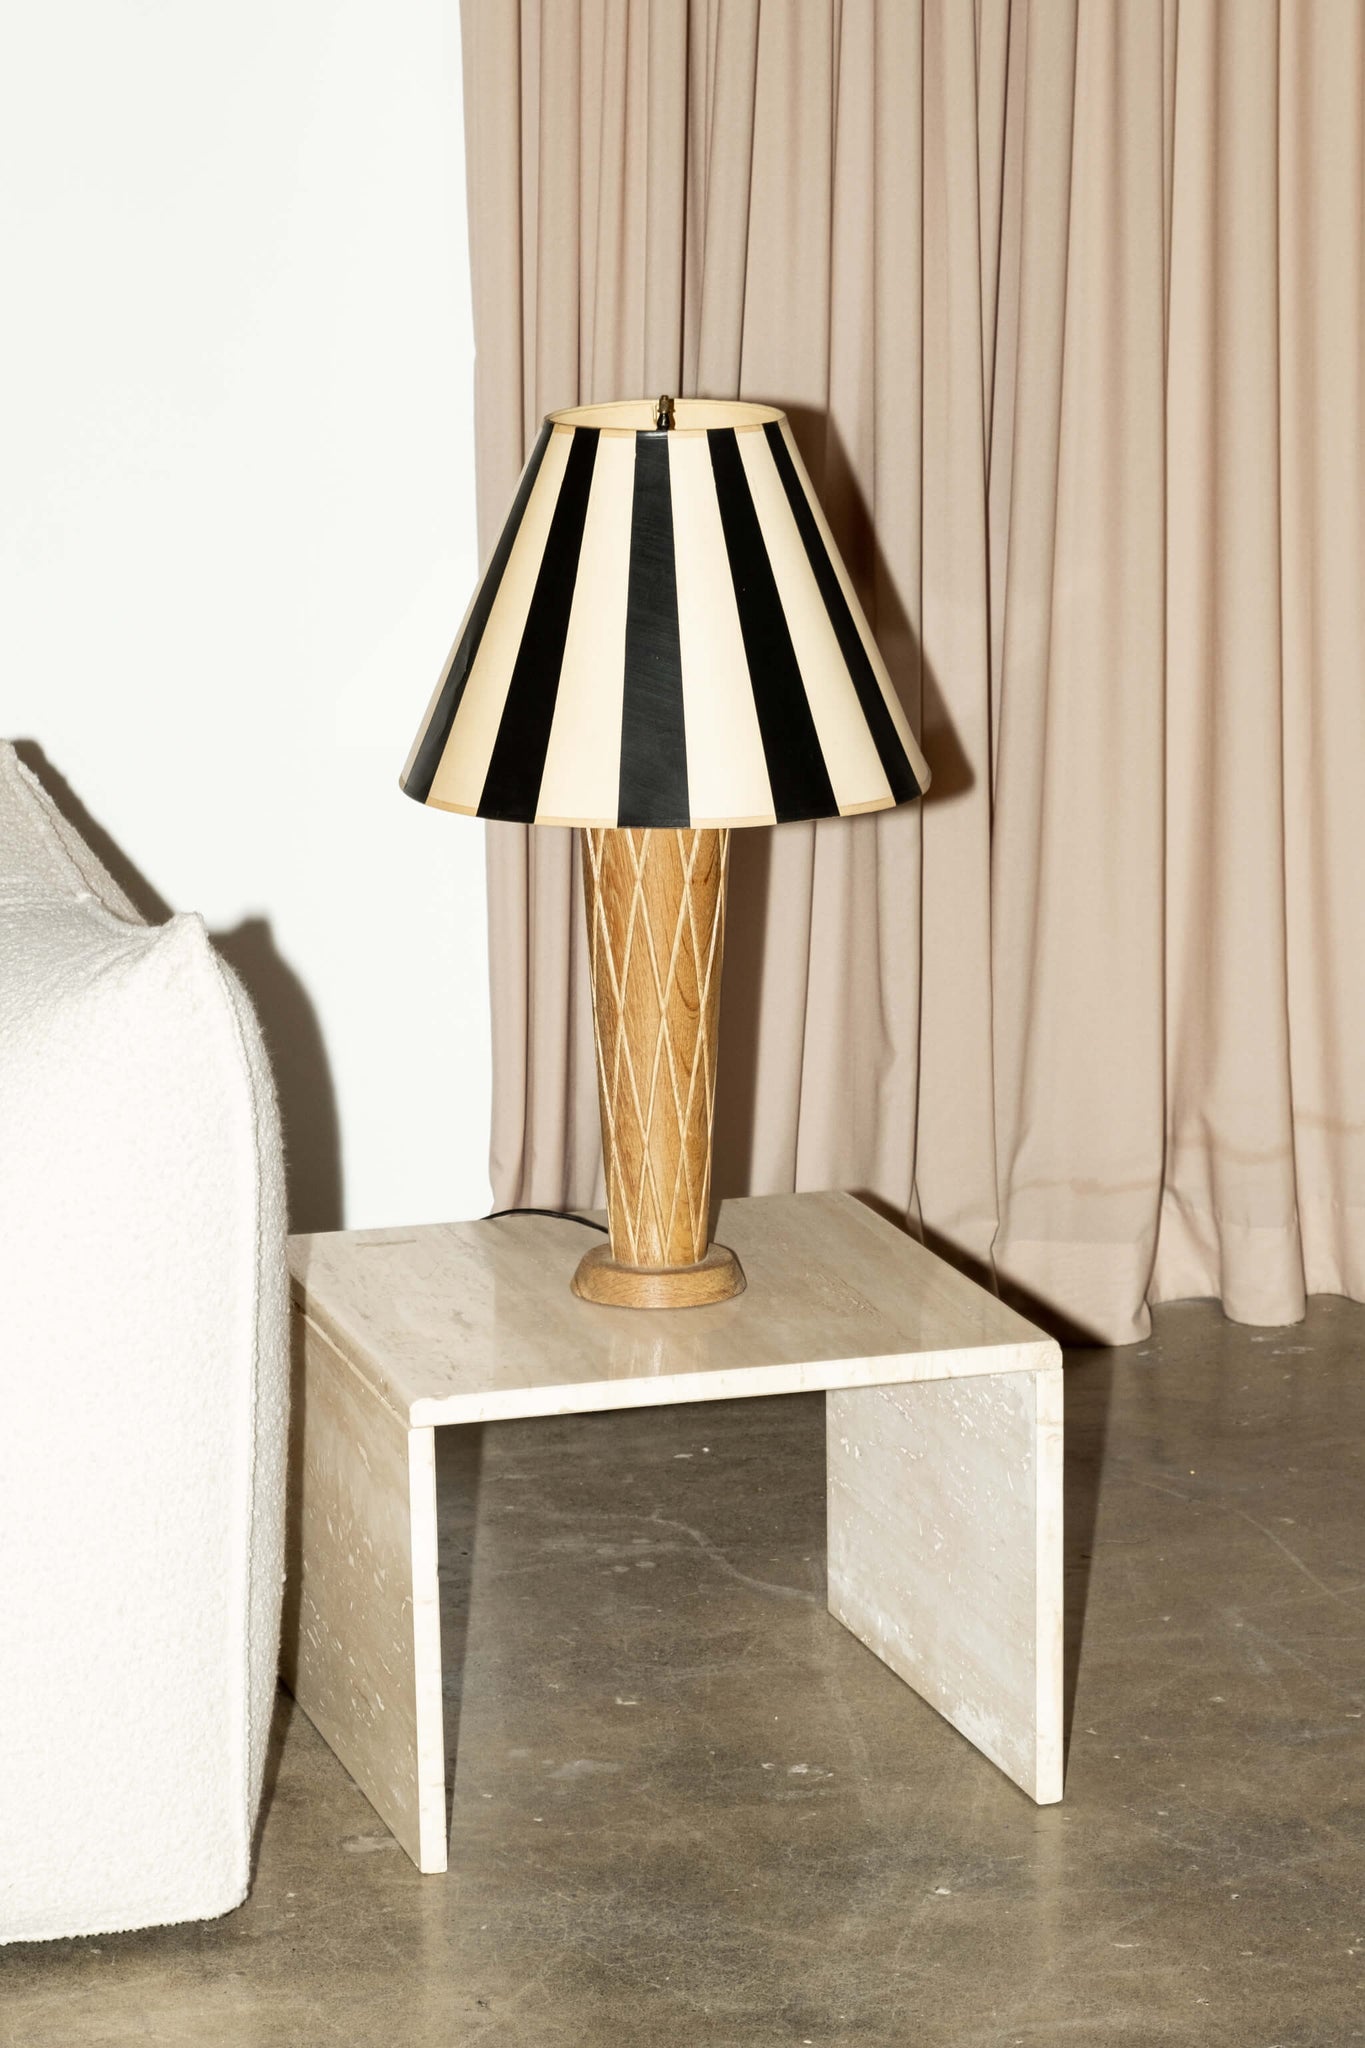 Bonne Choice - Carved Wood Lamp with B+W shade